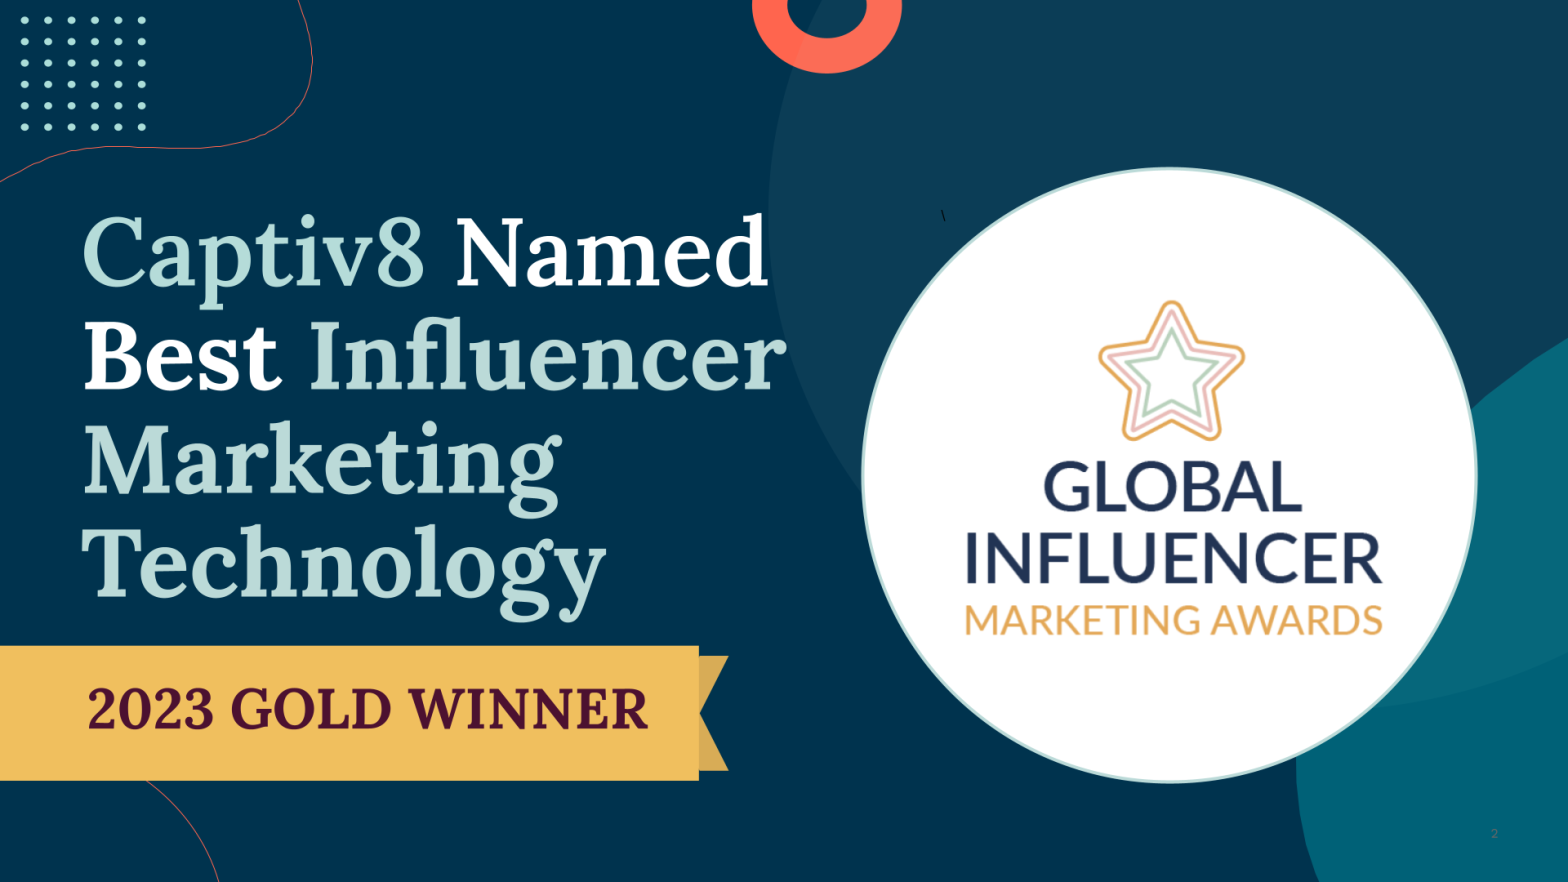 Captiv8 Earns Gold for Best Influencer Marketing Technology at the 2023